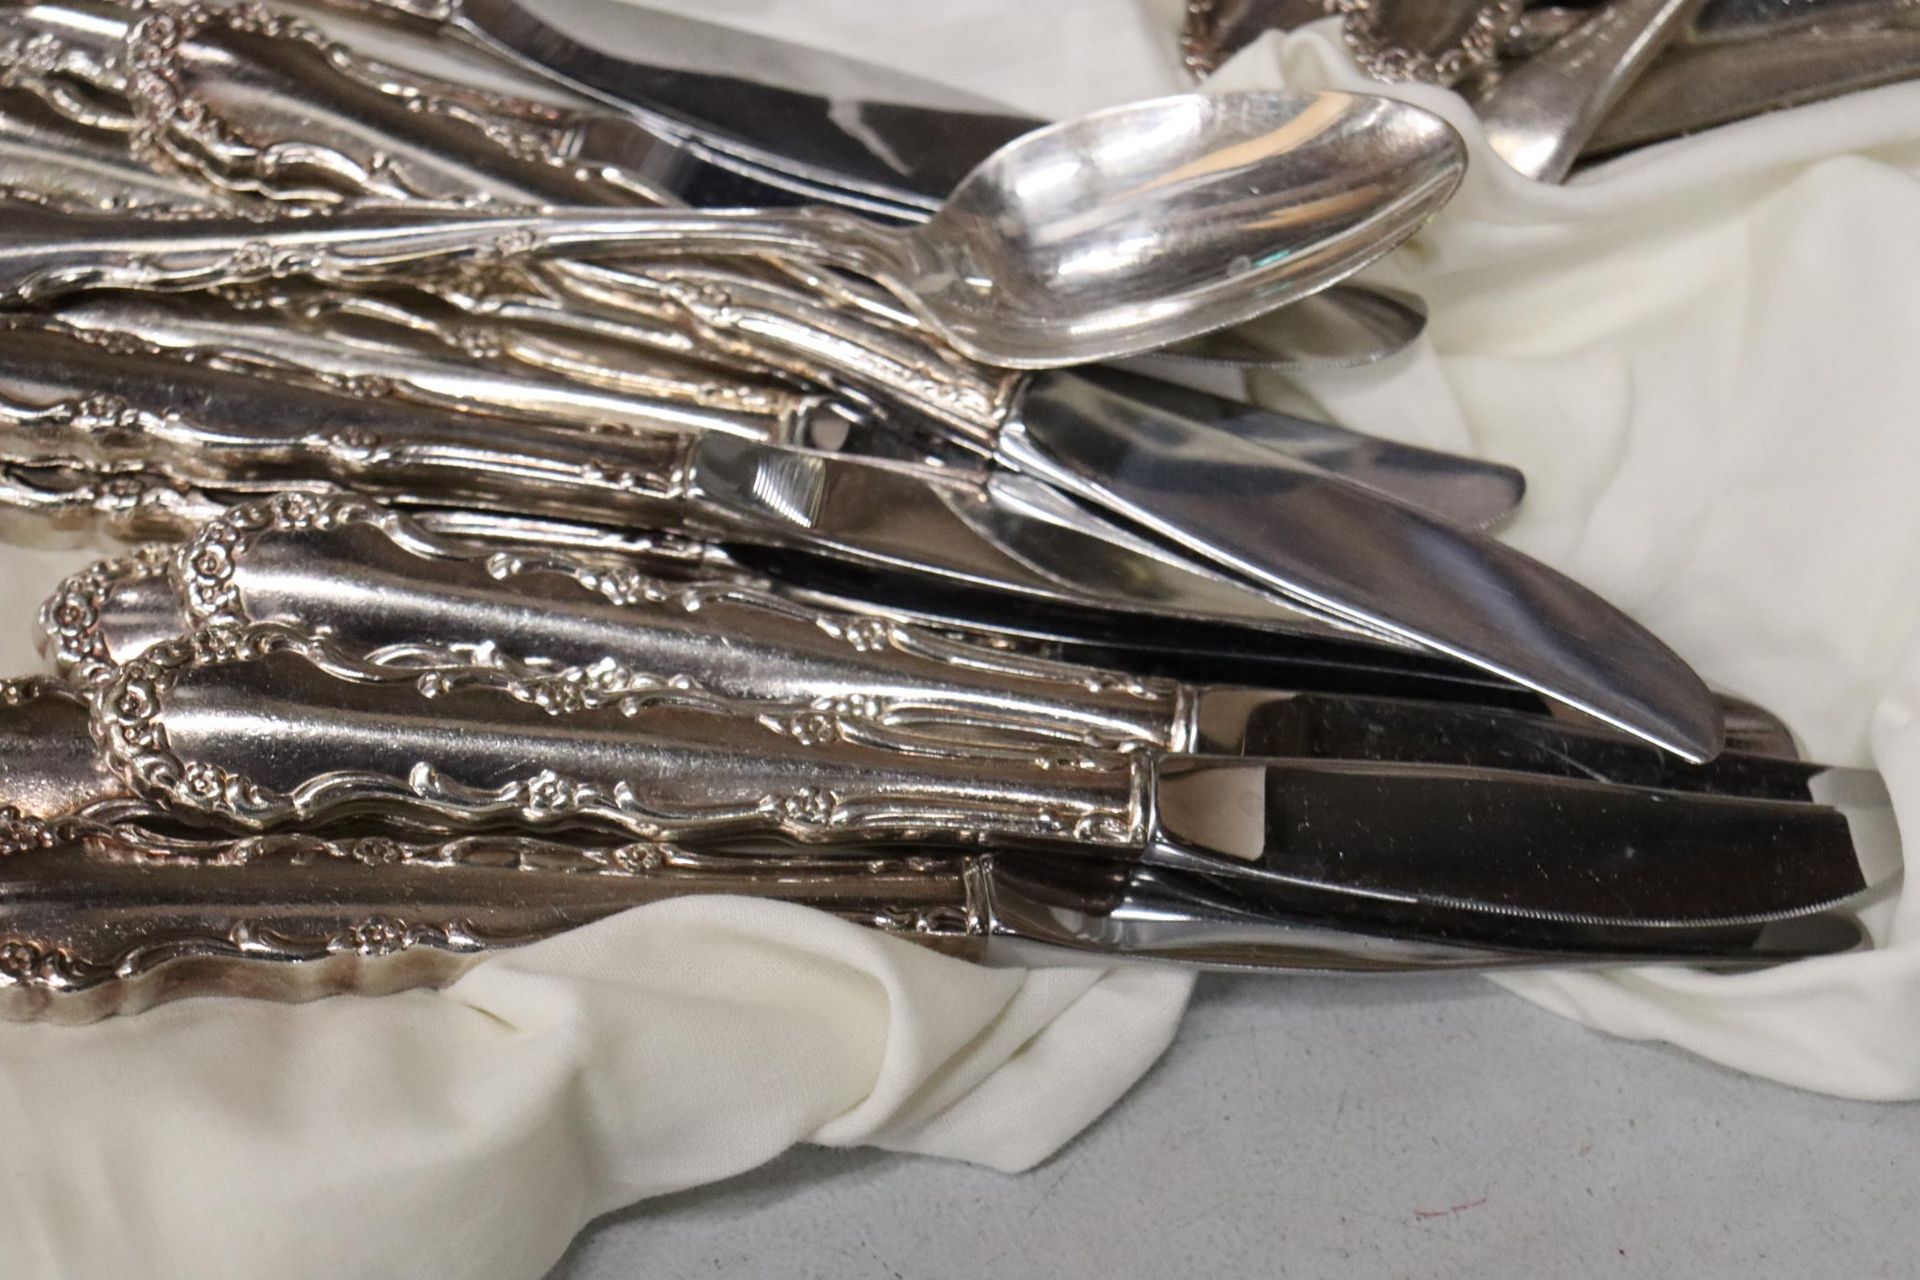 A QUANTITY OF FLATWARE, KNIVES, FORKS AND SPOONS - Image 5 of 9